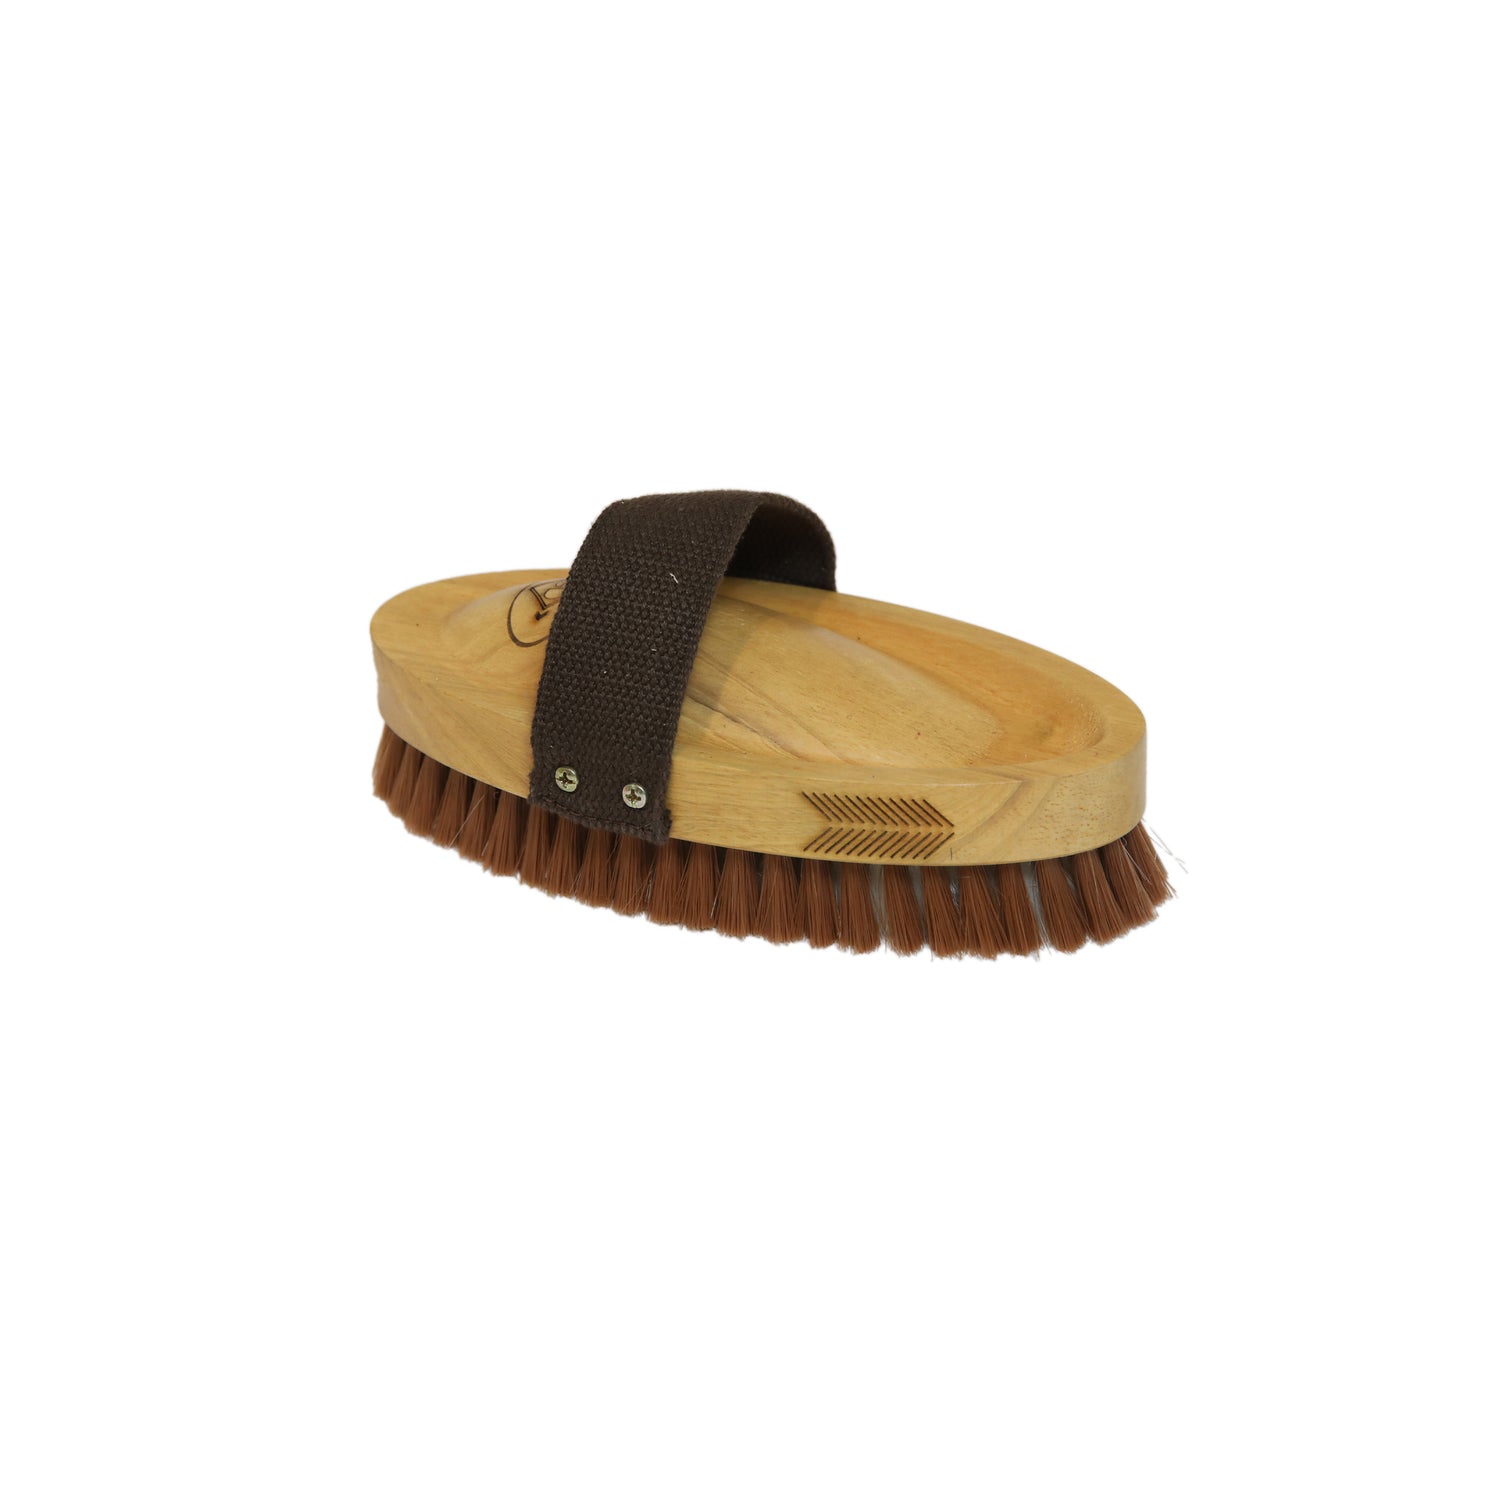 This varnished oval brush is filled with short nylon bristles to help distribute the oil of the coat and produce a shiny, glowing coat. 